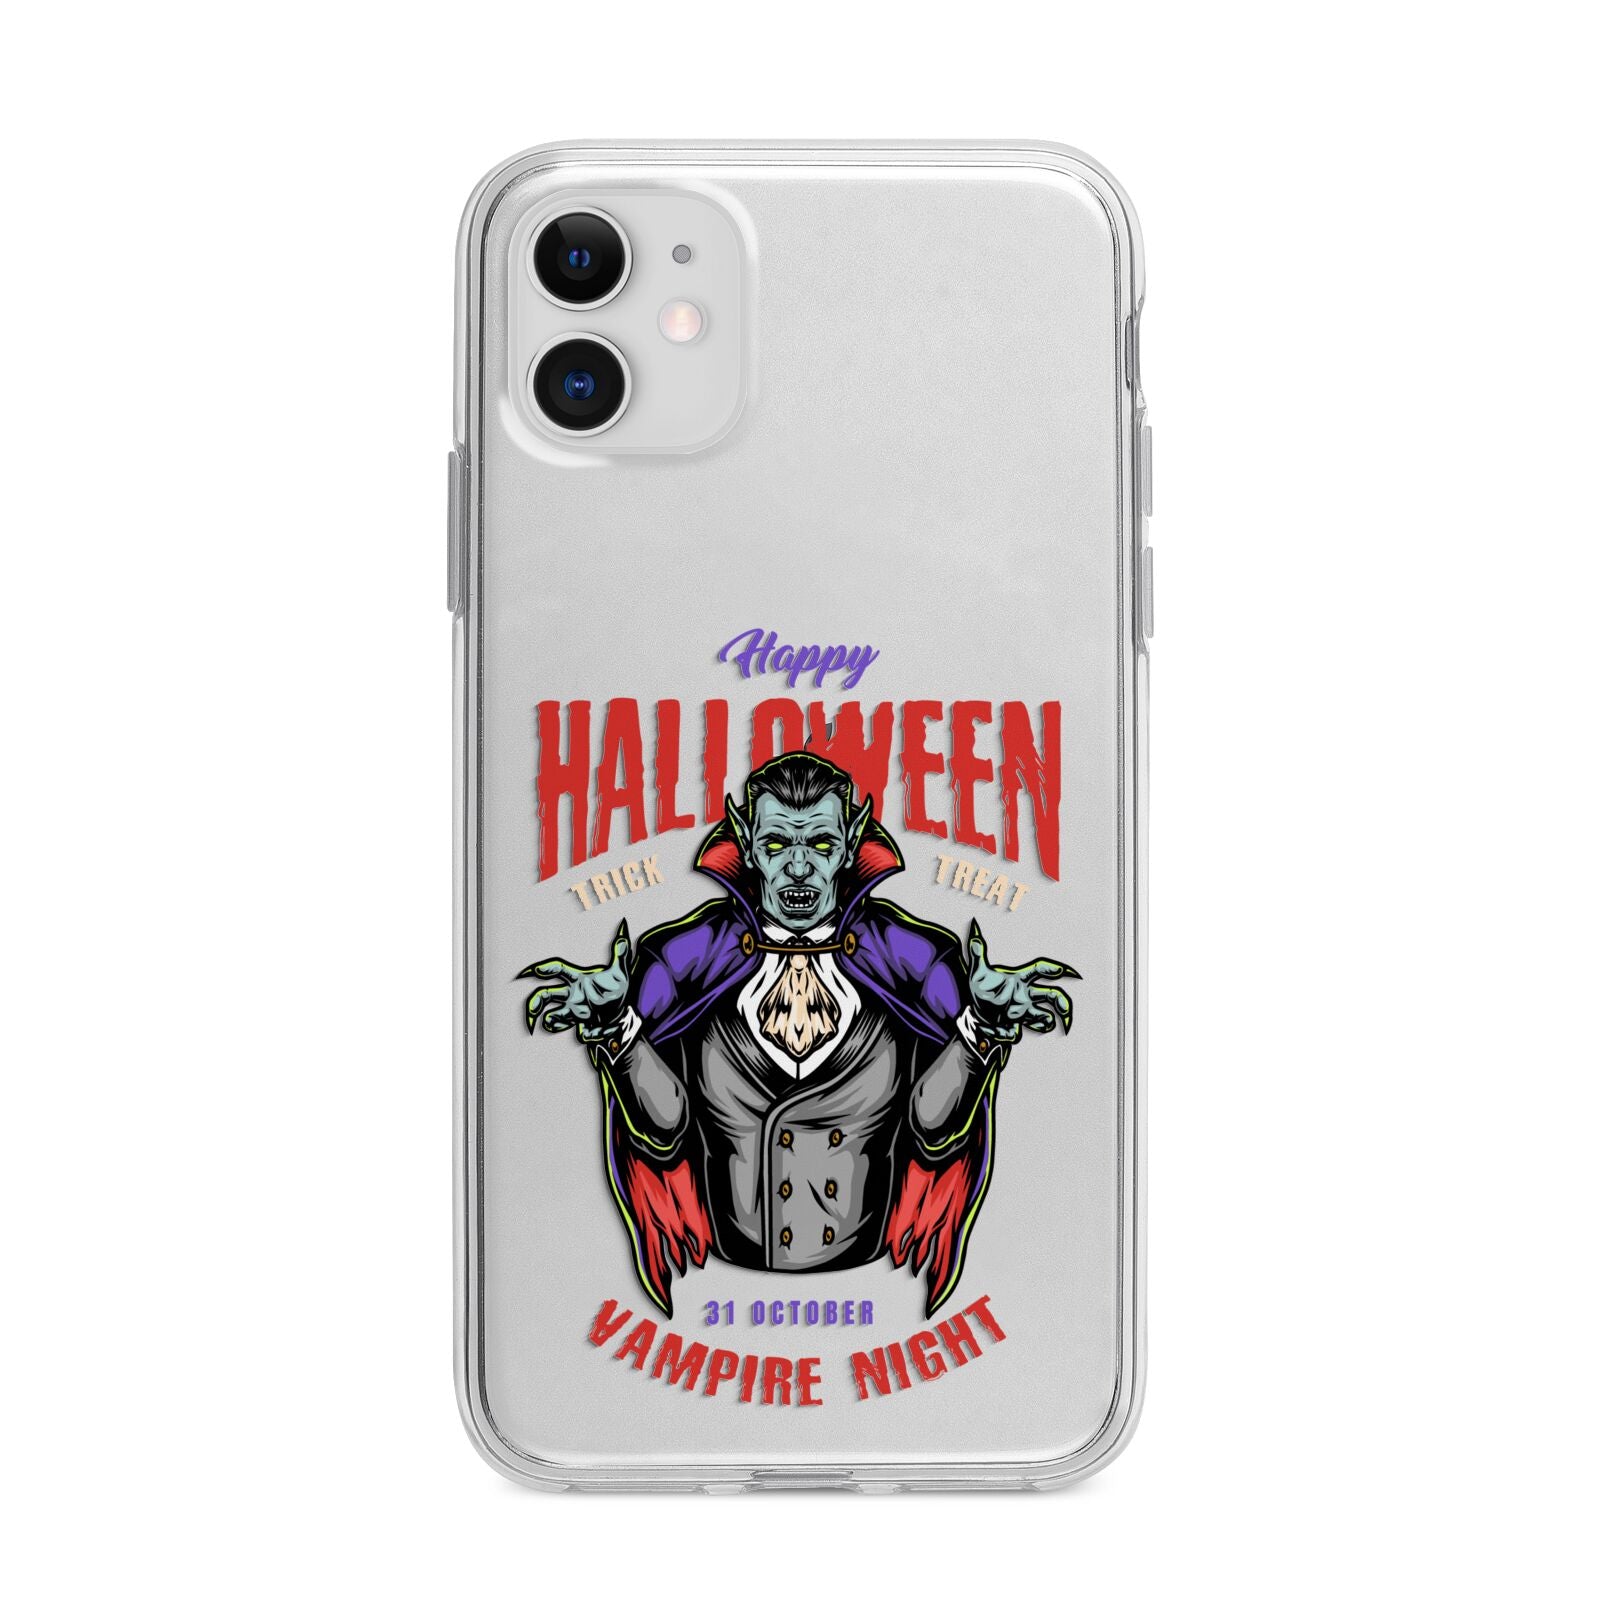 Vampire Night Apple iPhone 11 in White with Bumper Case